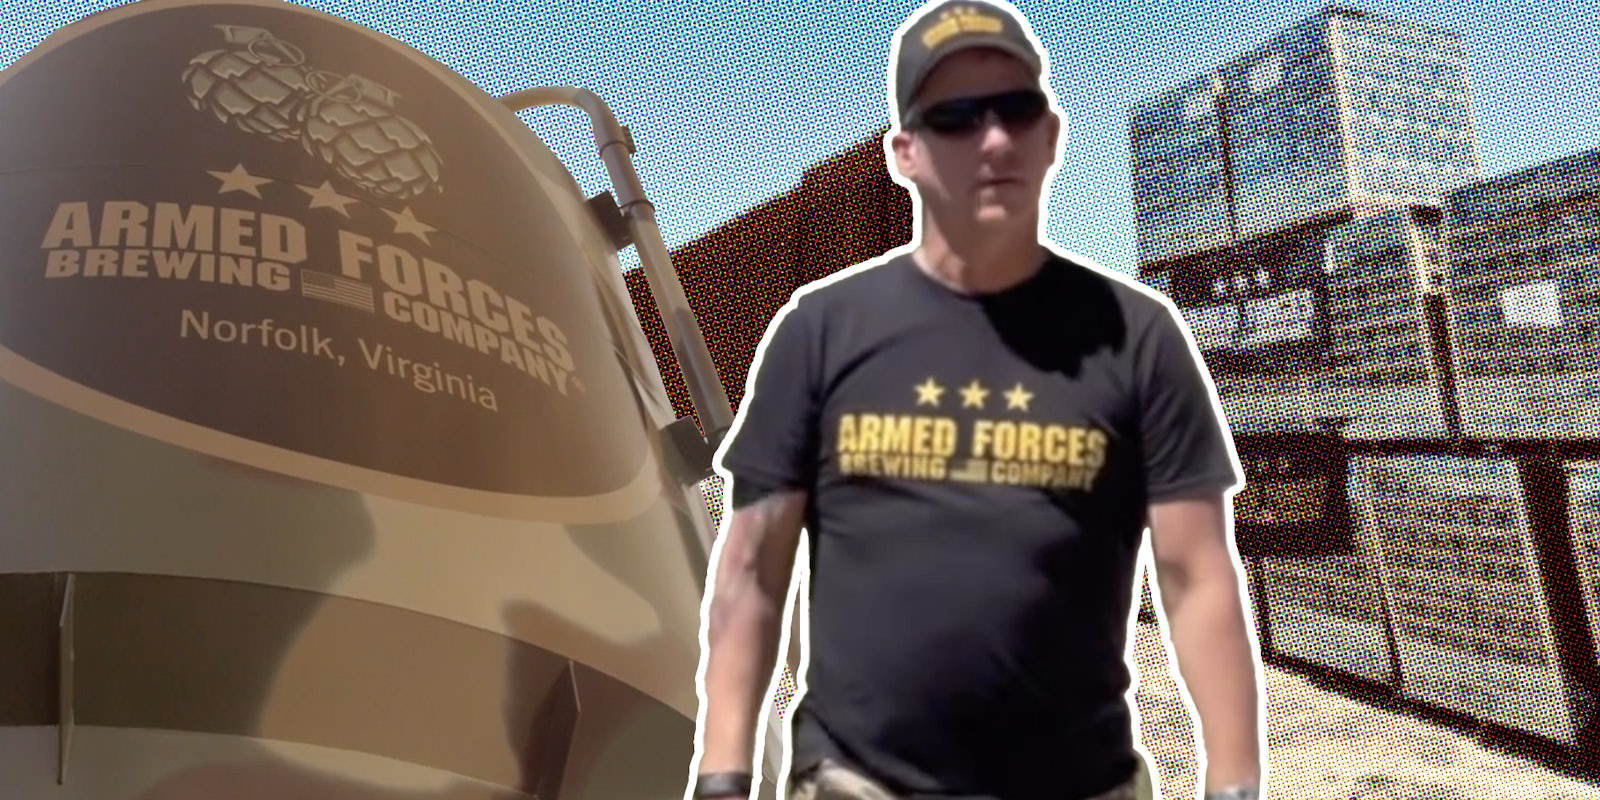 Armed Forces Brewing company worker in front of beer silo and wall they built with cans